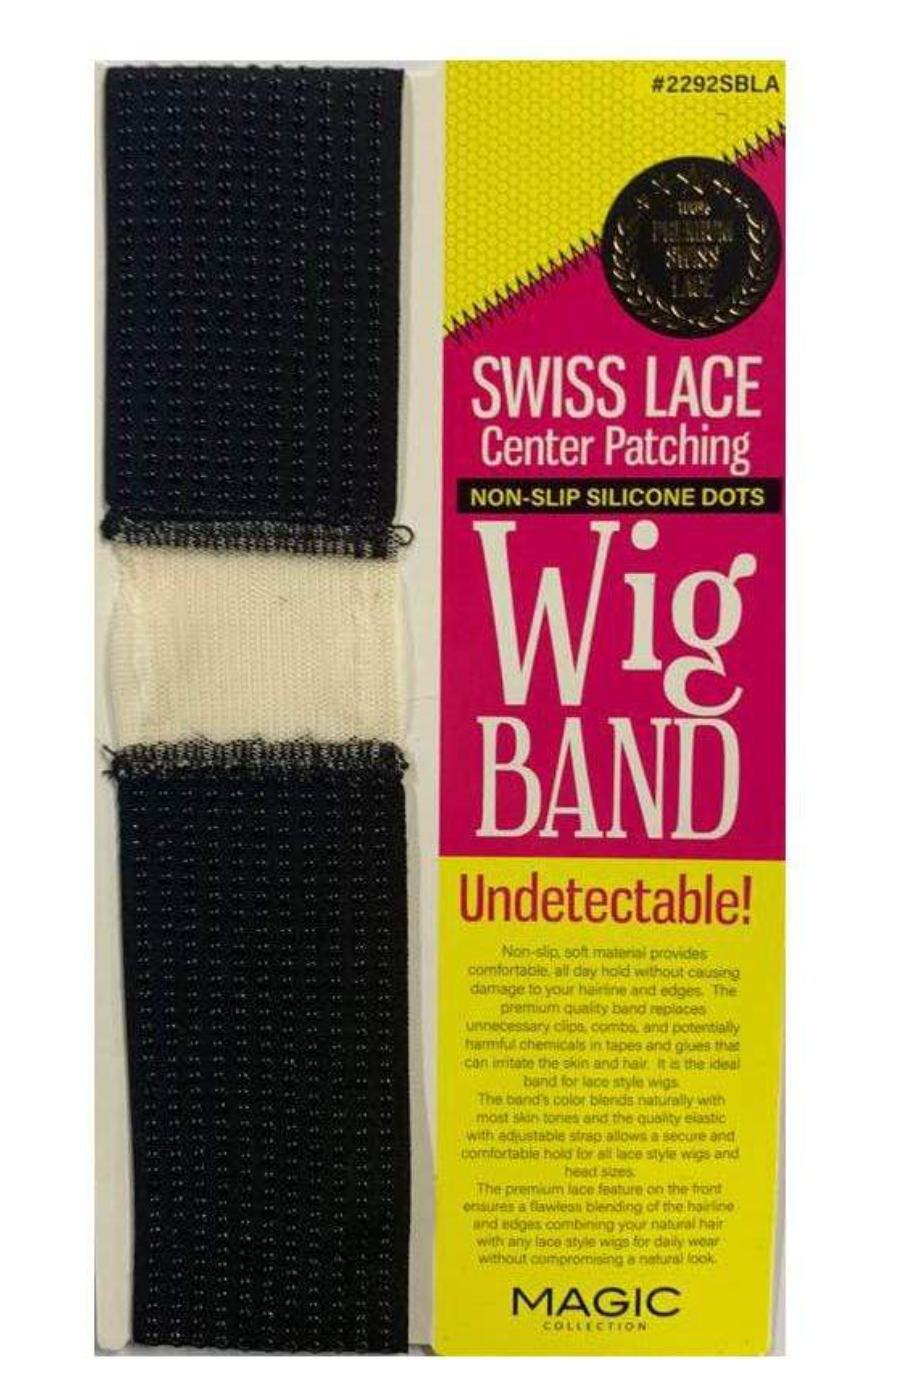 MAGIC COLLECTION - SWISS LACE WIG BAND